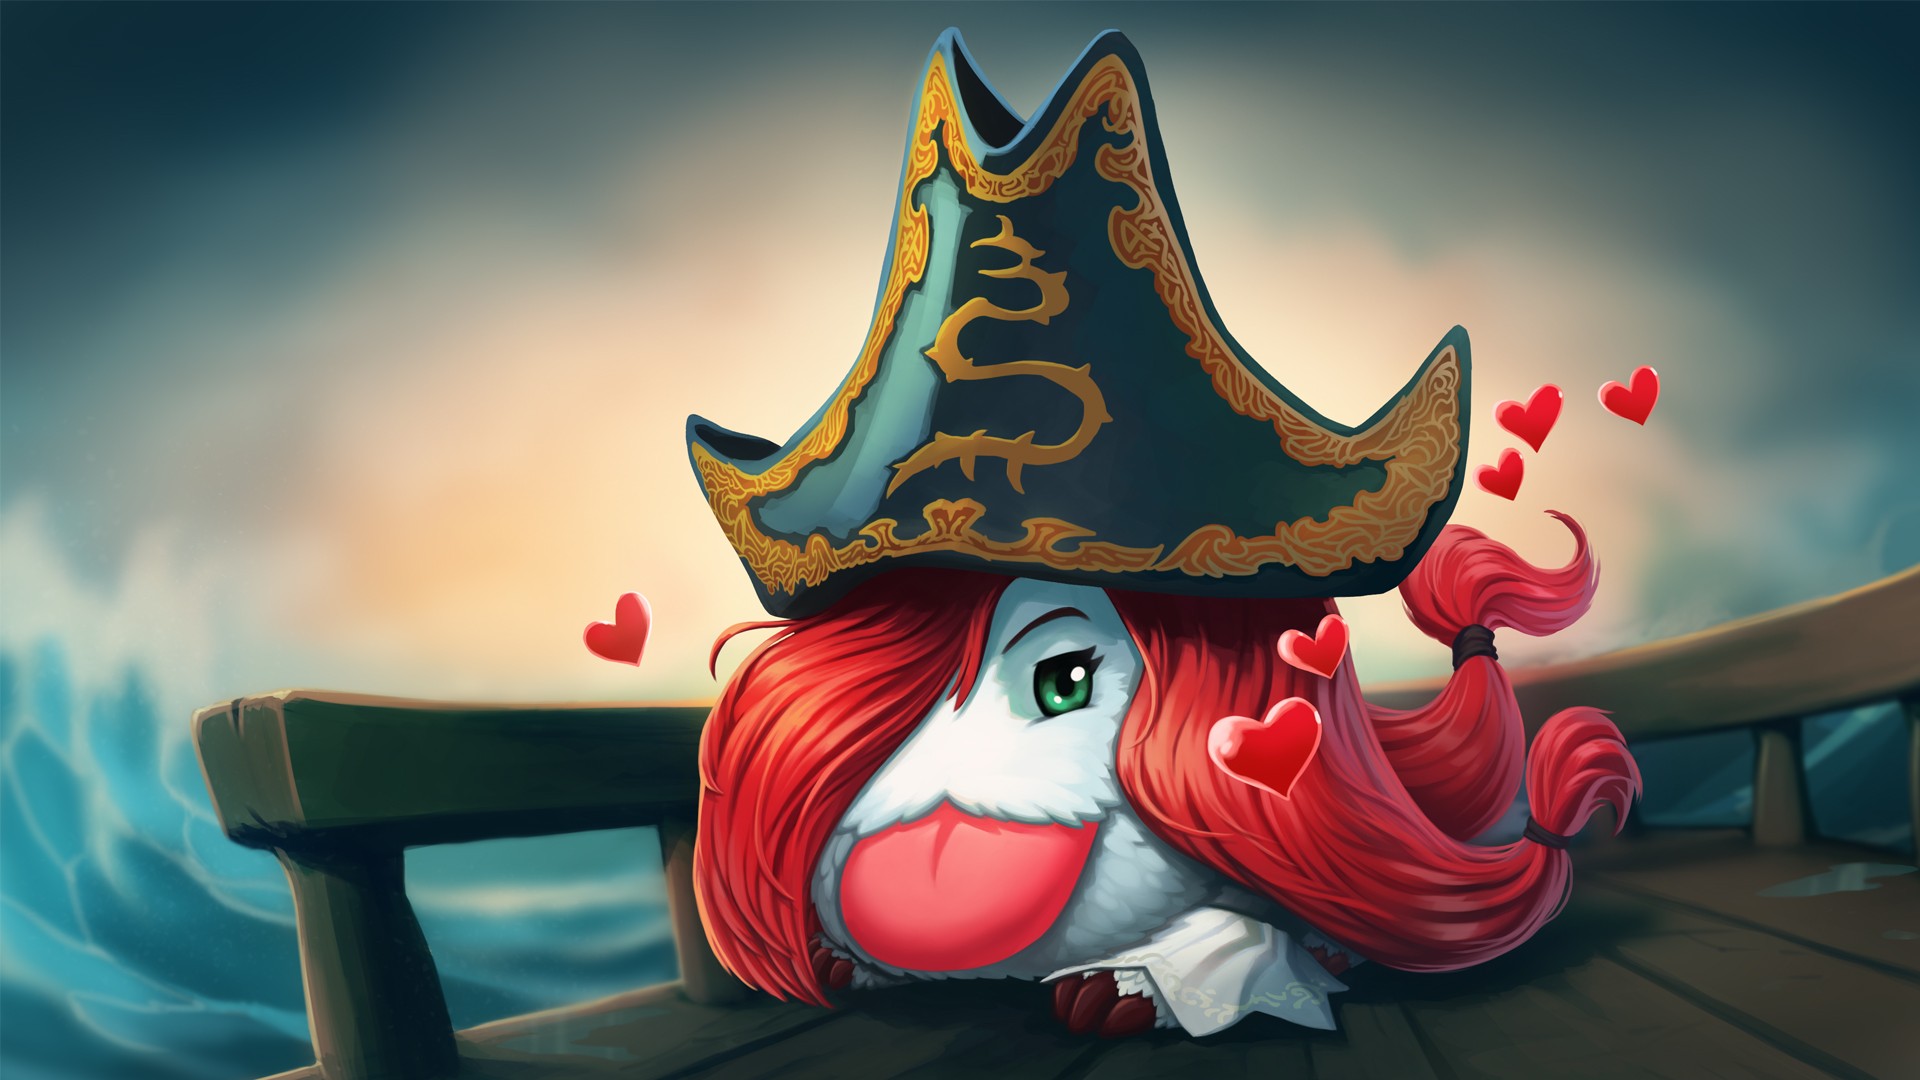 General 1920x1080 League of Legends Miss Fortune (League of Legends) Poro (League of Legends) video game art PC gaming video game characters